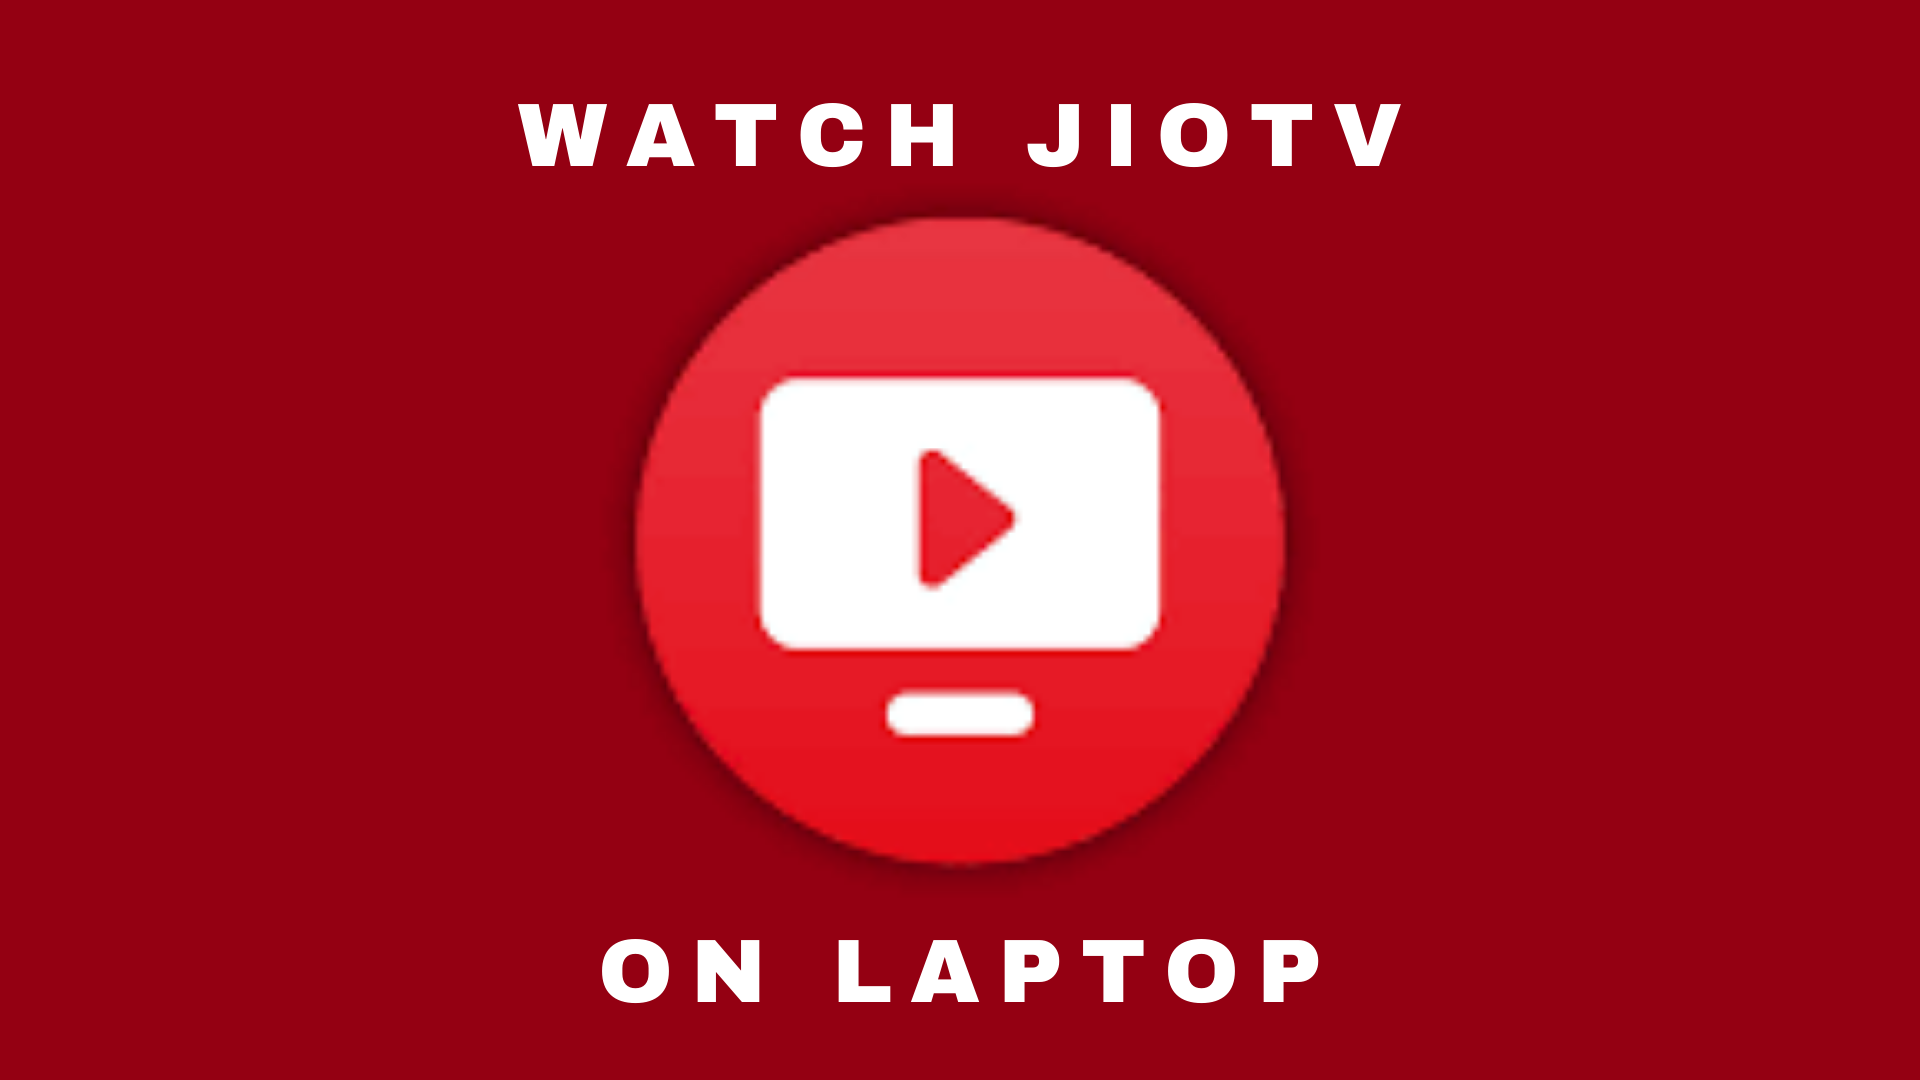 How To Watch JioTV On Laptop?